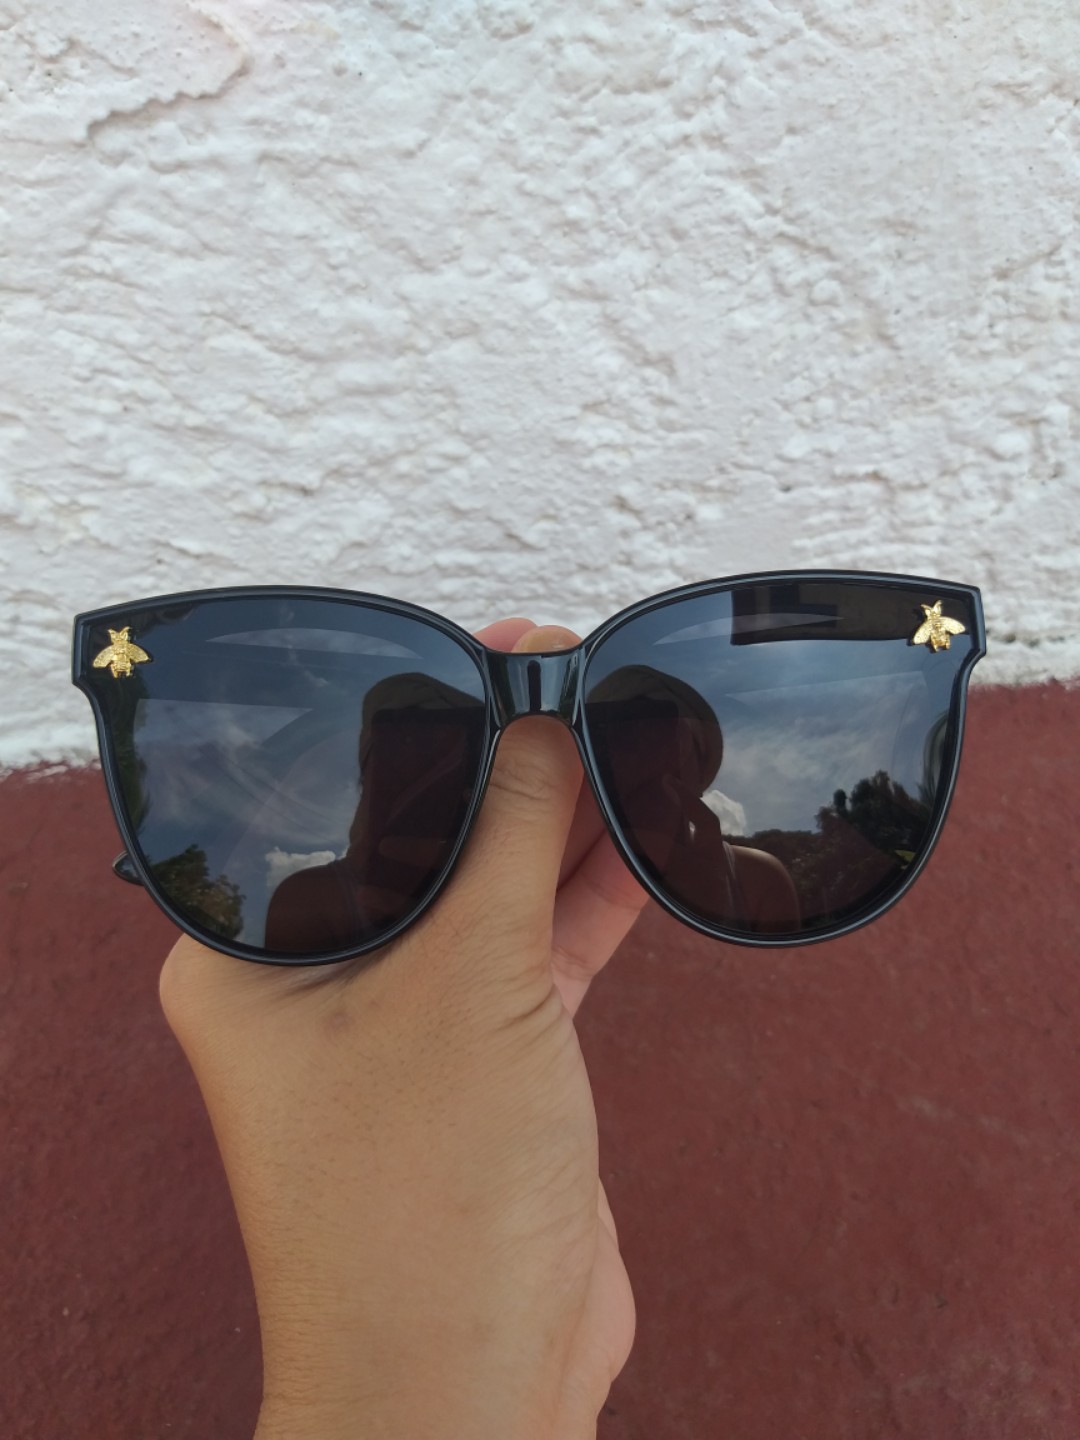 bumble bee gucci glasses